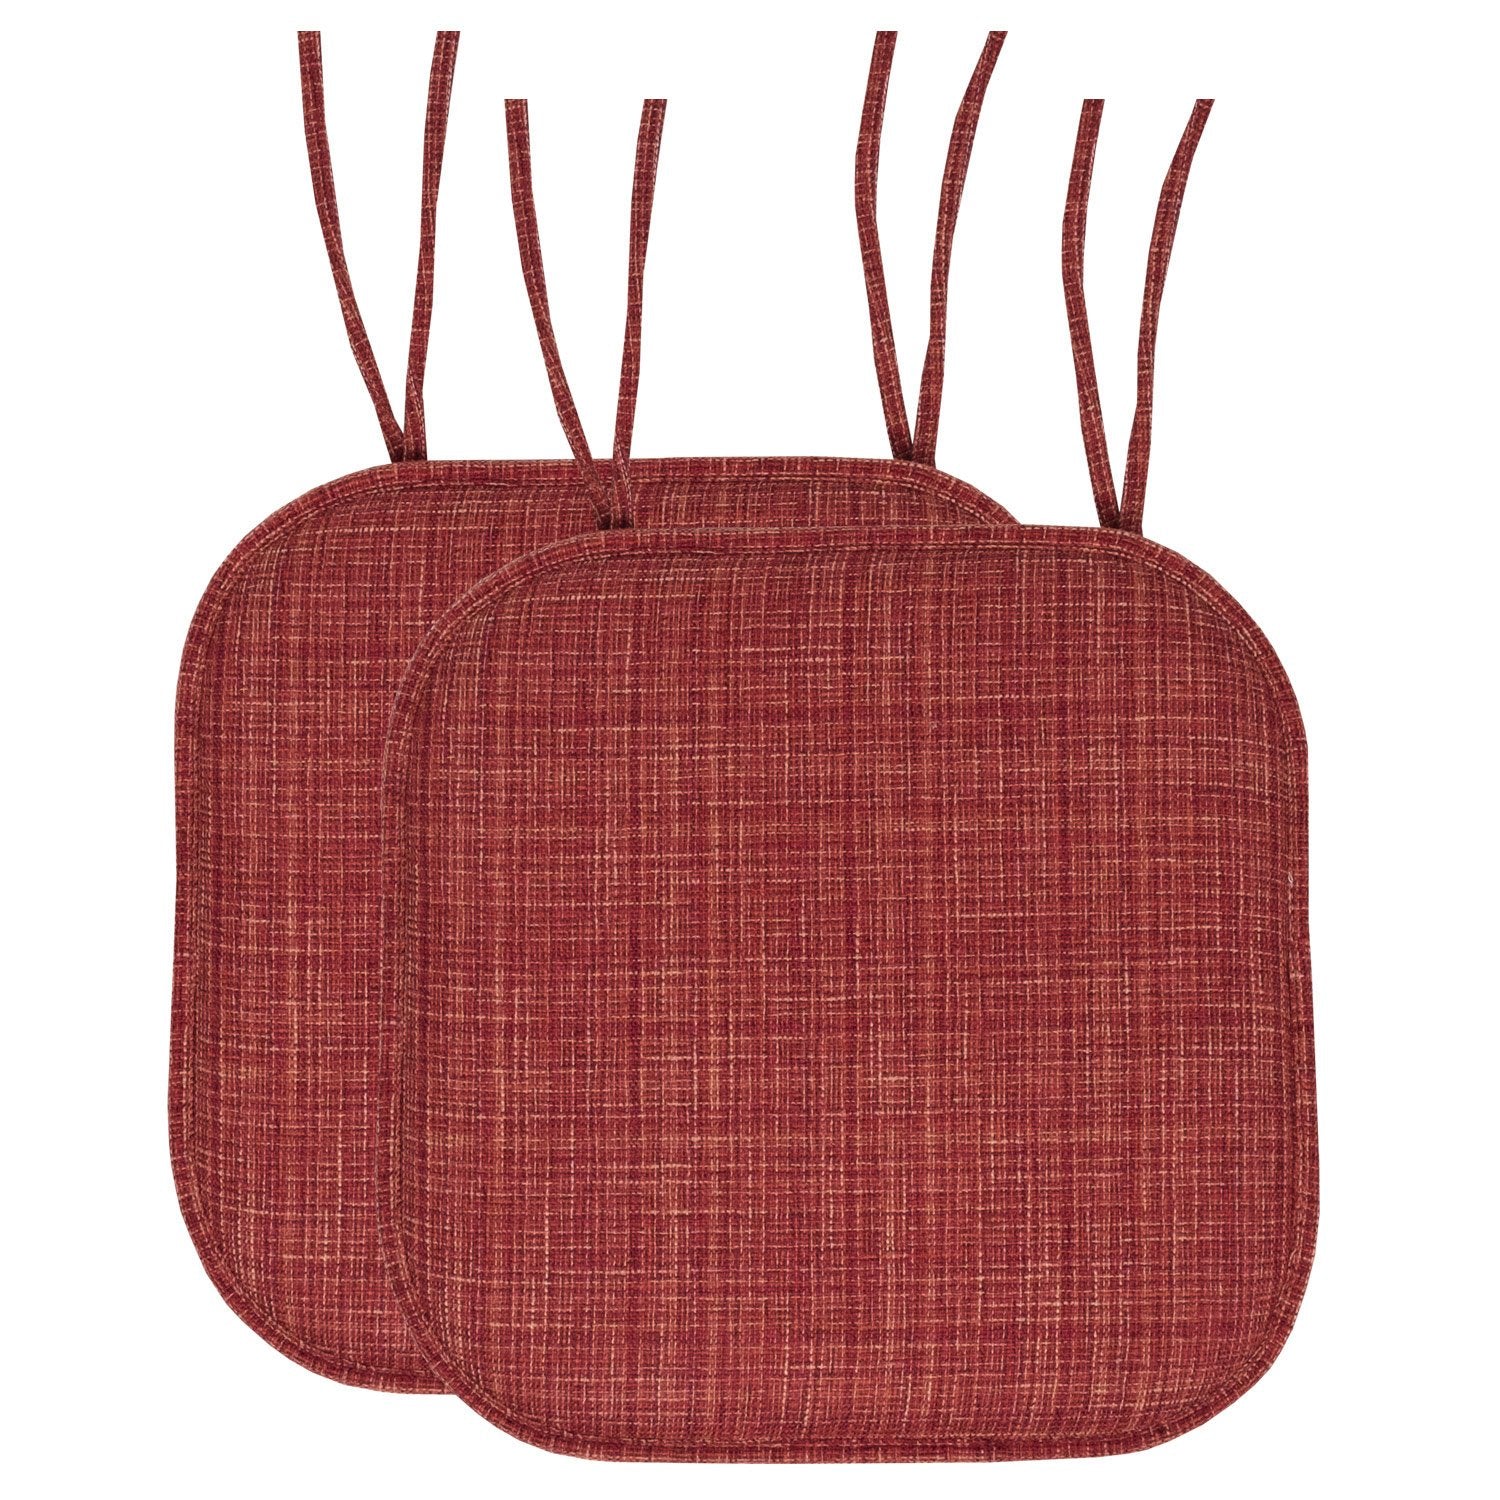 Aria Chair Cushion Set with Ties Multi Burgundy 2-Pack